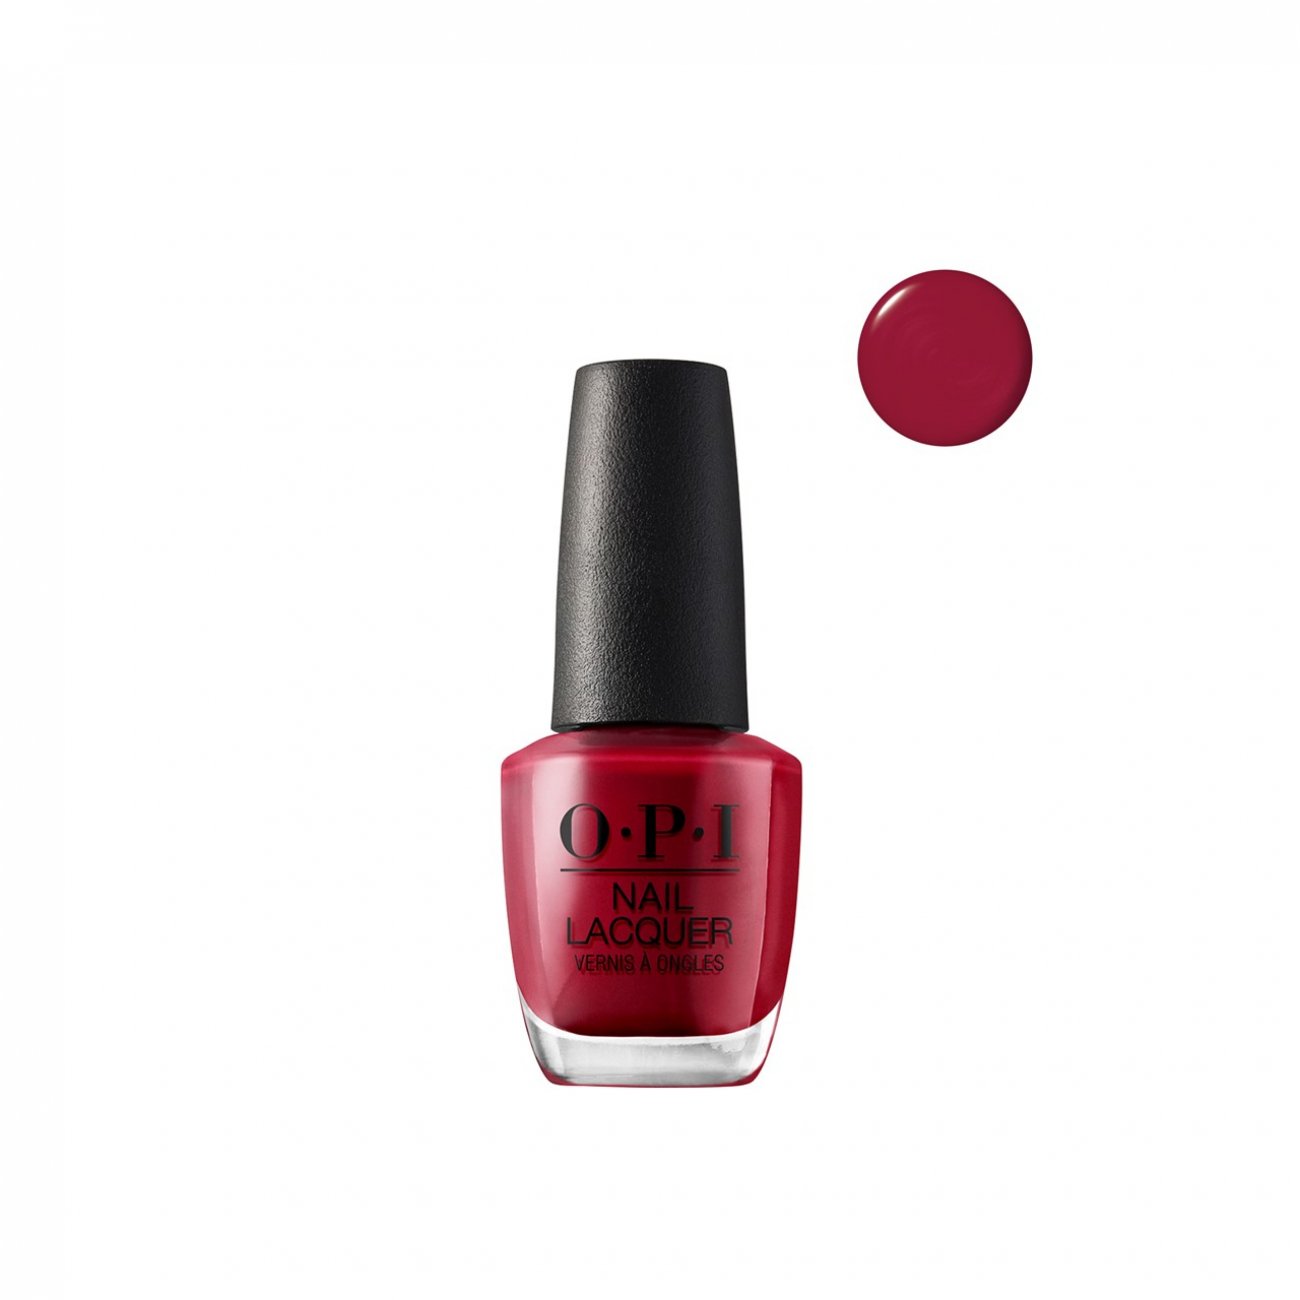 OPI Nail Lacquer Reds - Cosmeterie Online Shop